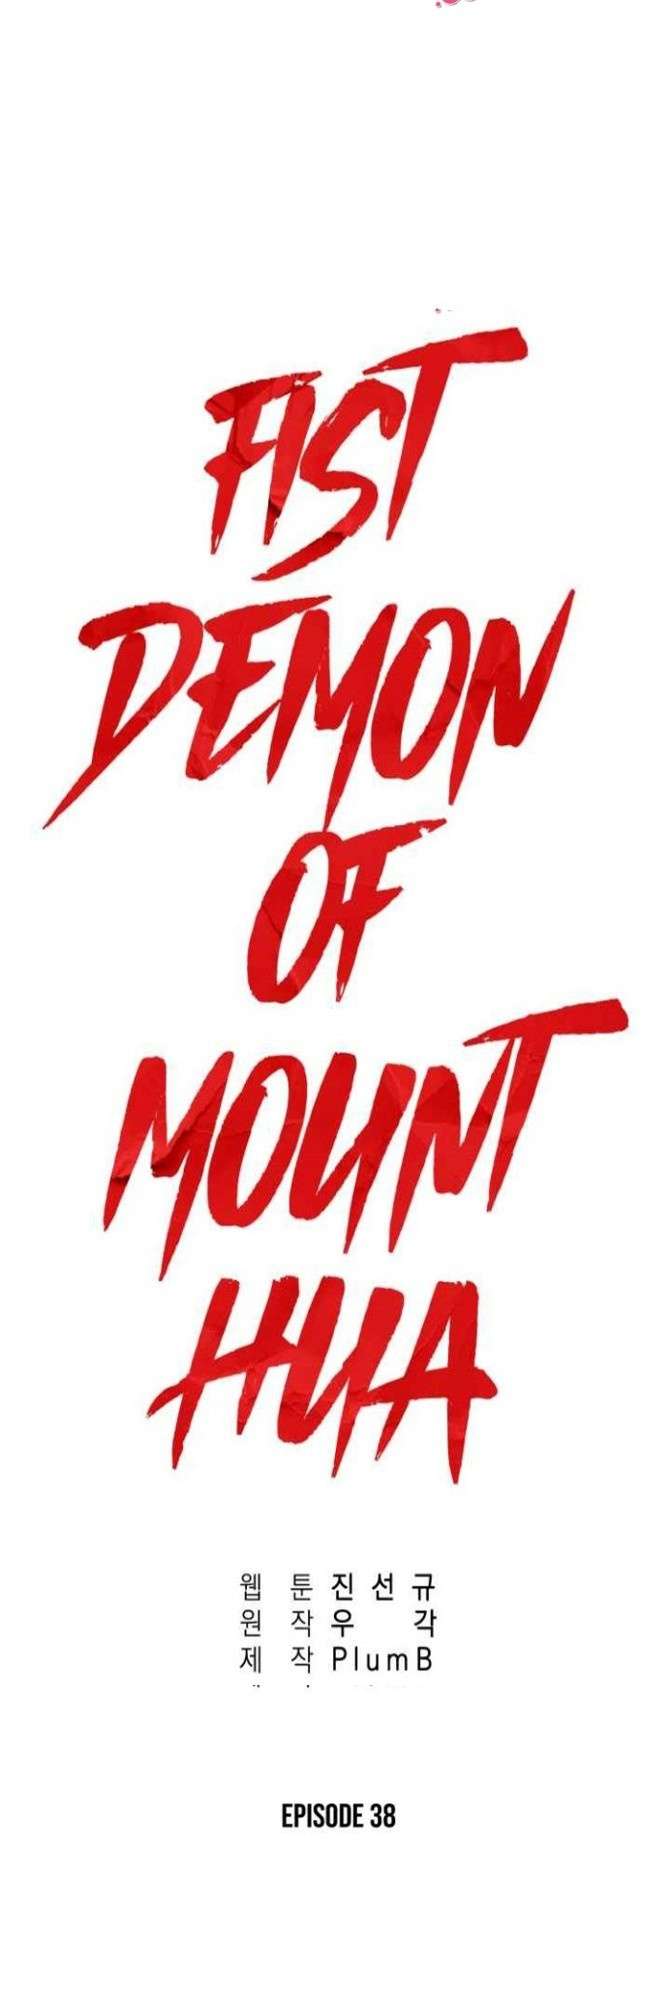 Fist Demon Of Mount Hua Chapter 38